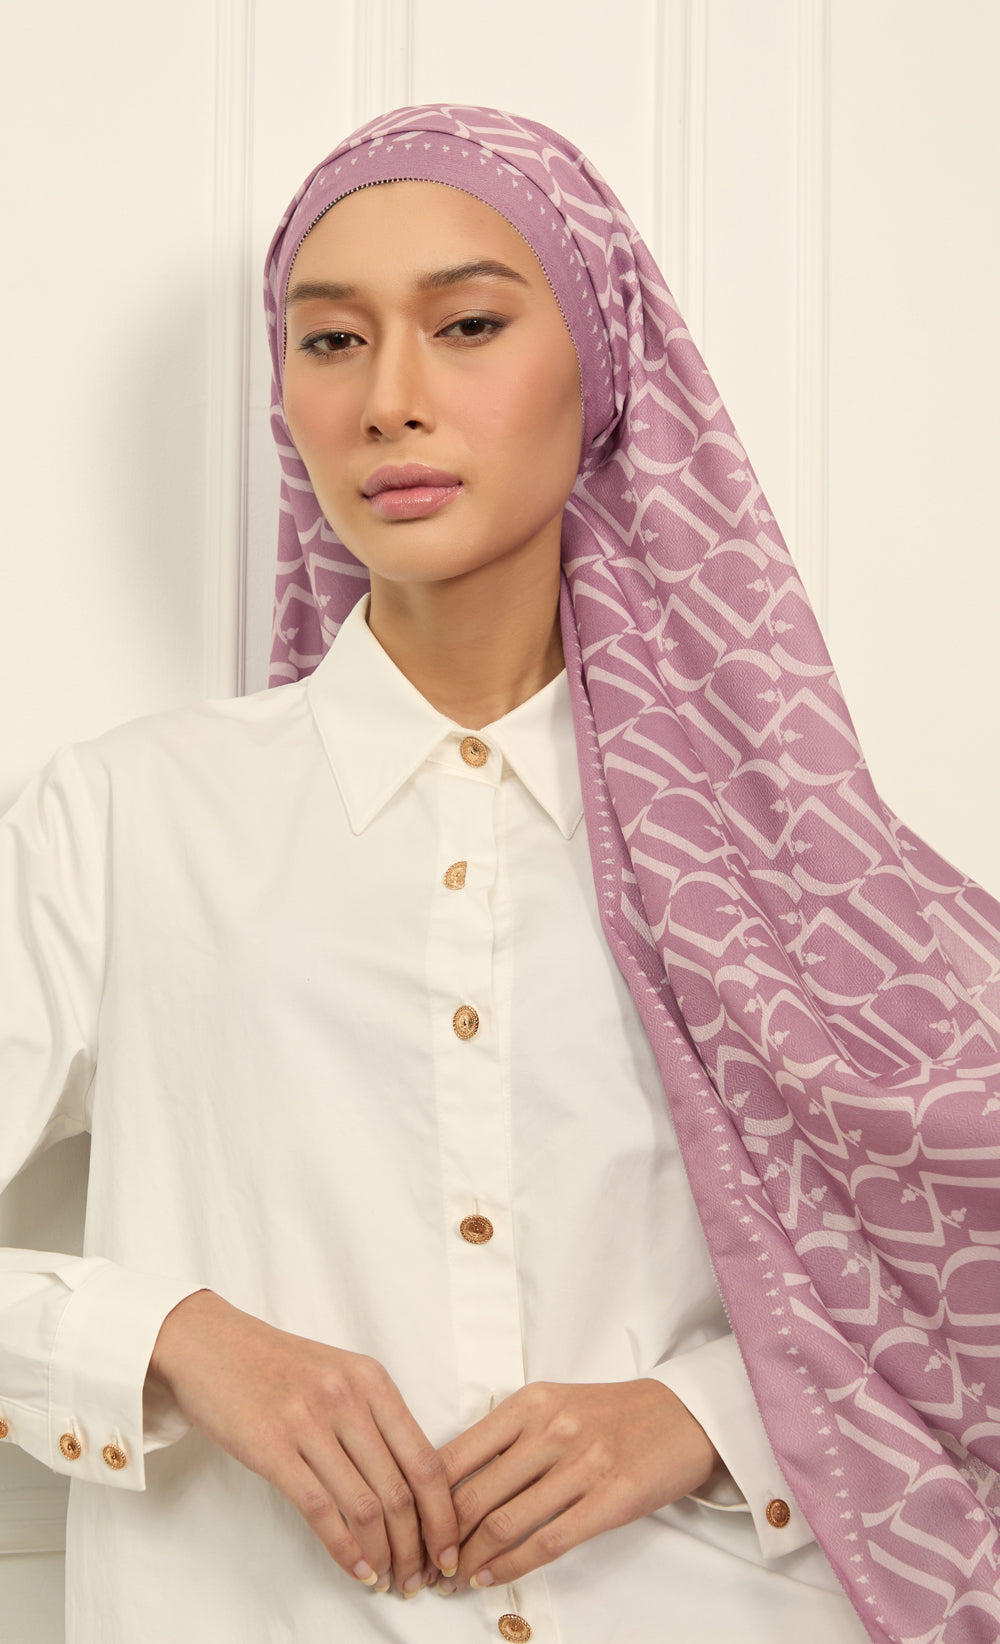 D Monogram dUCk Voile Shawl in Berry Chantilly